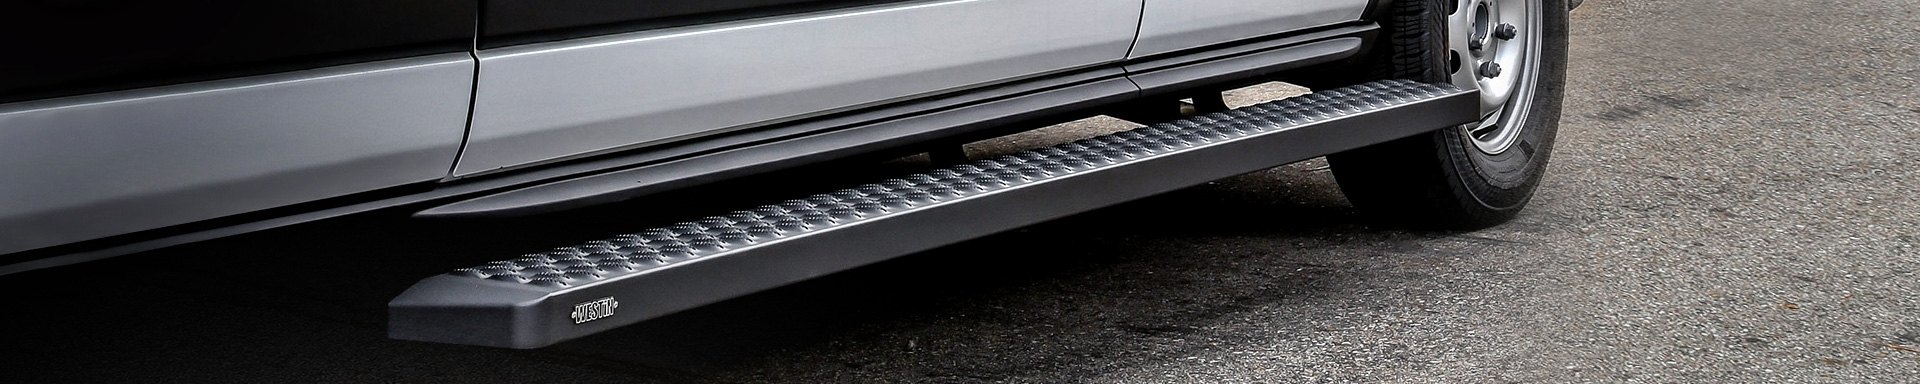 First Look At The New 6.25" Grate Steps by Westin For 2015-2021 Ford Transit